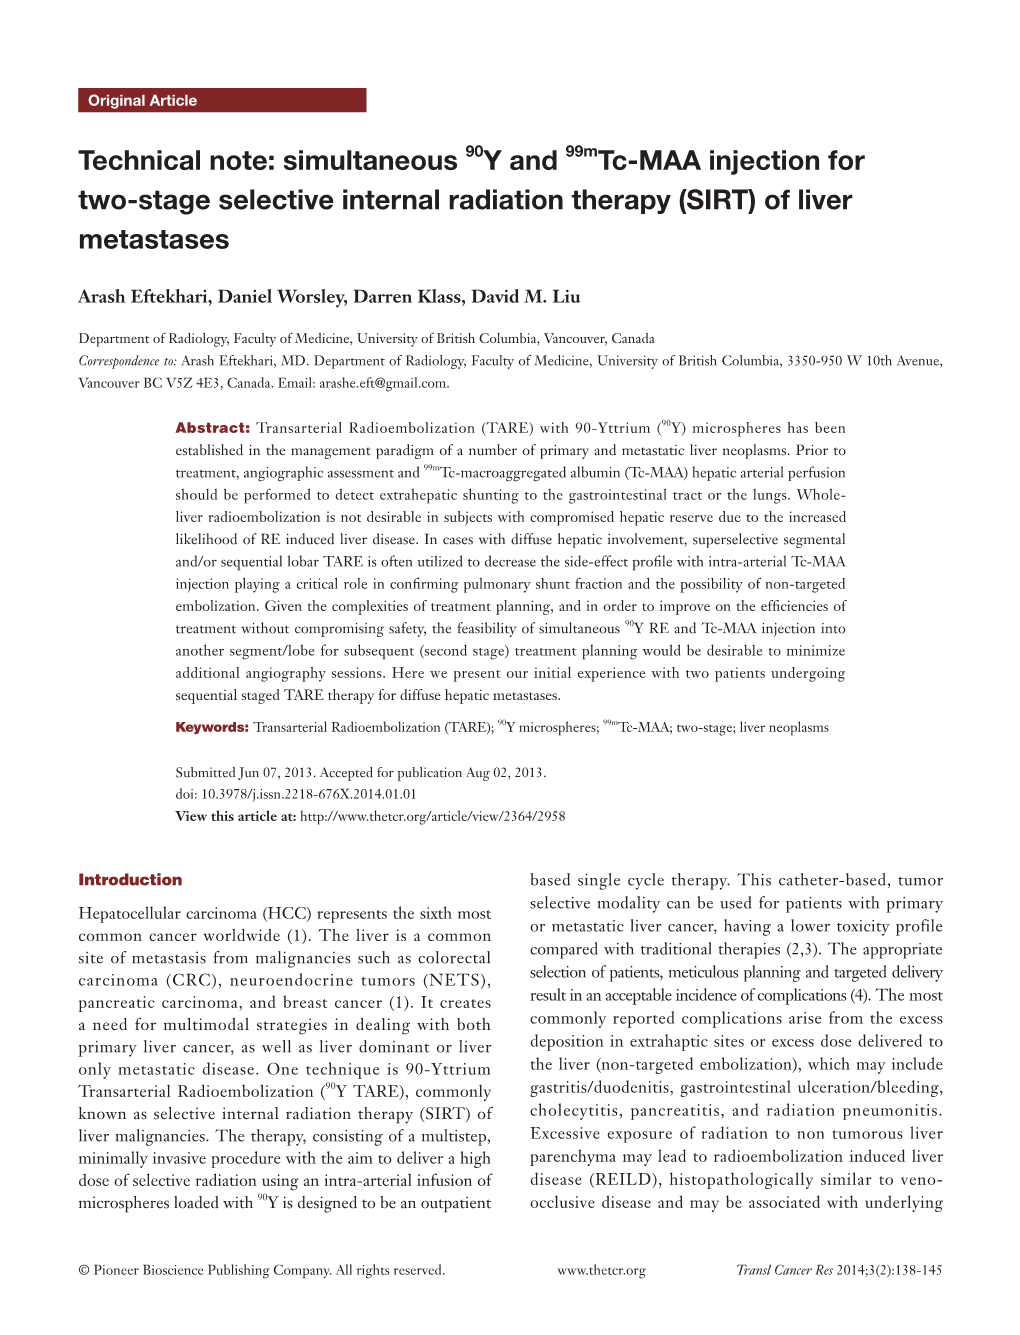 Simultaneous 90Y and 99Mtc-MAA Injection for Two-Stage Selective Internal Radiation Therapy (SIRT) of Liver Metastases